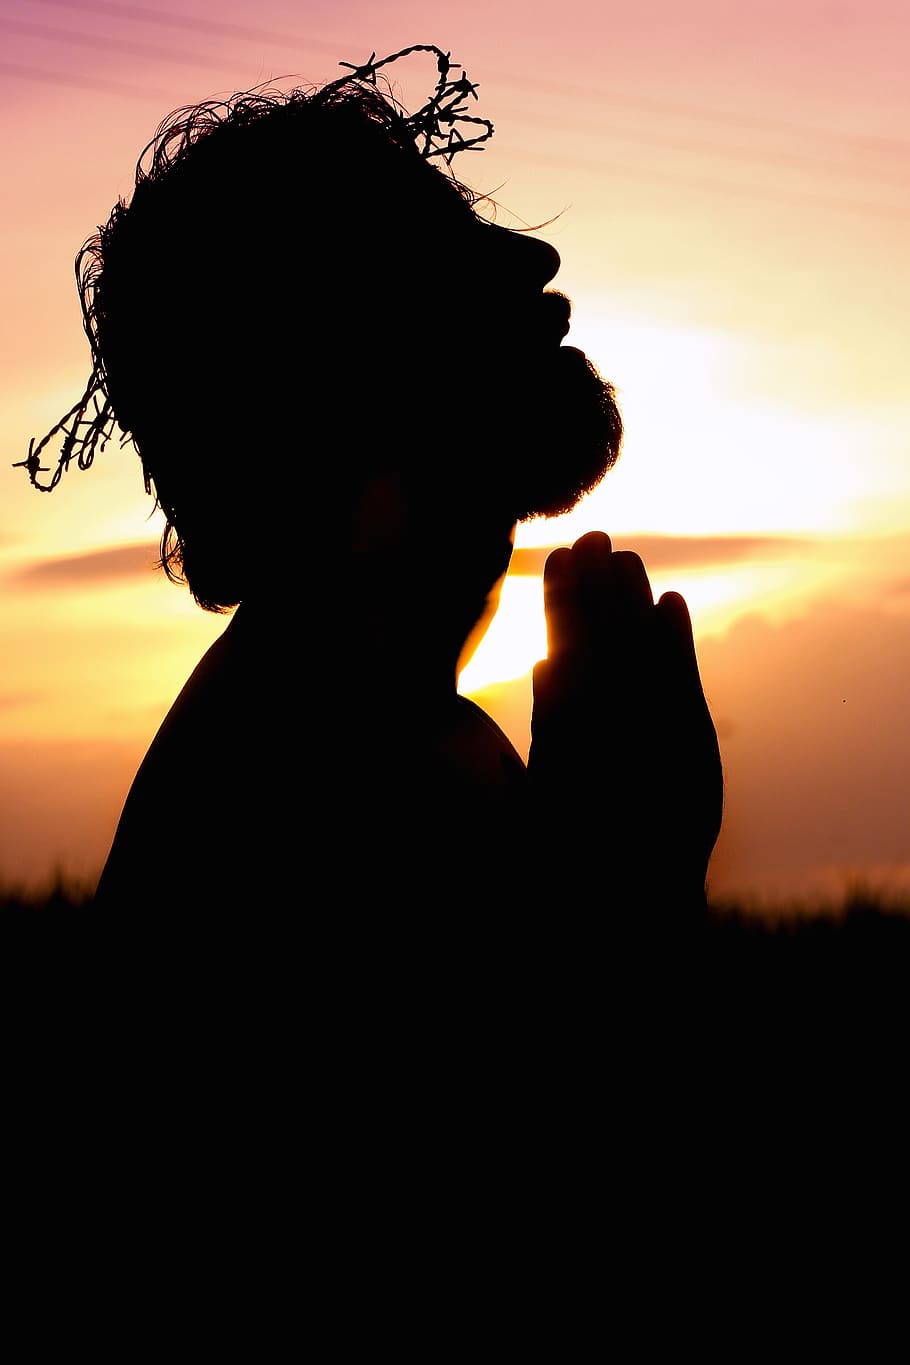 Silhouette Image of Person Praying, adult, background, backlit